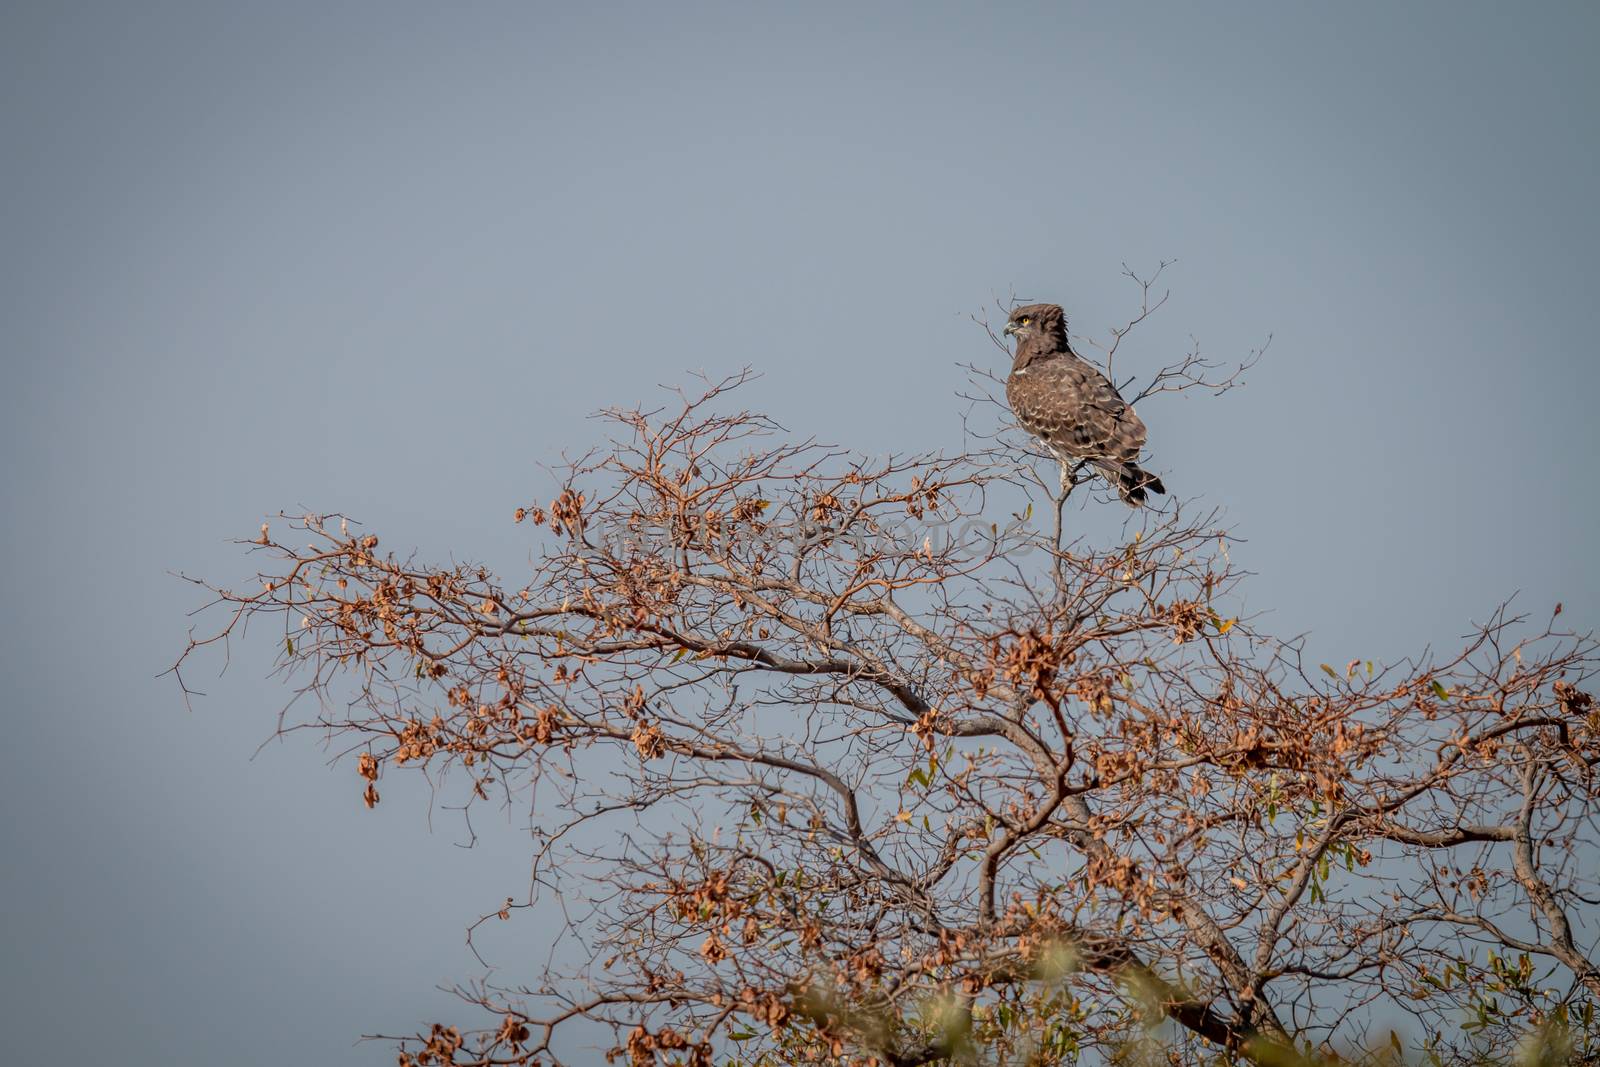 Brown snake eagle sitting in a tree in the Welgevonden game reserve, South Africa.